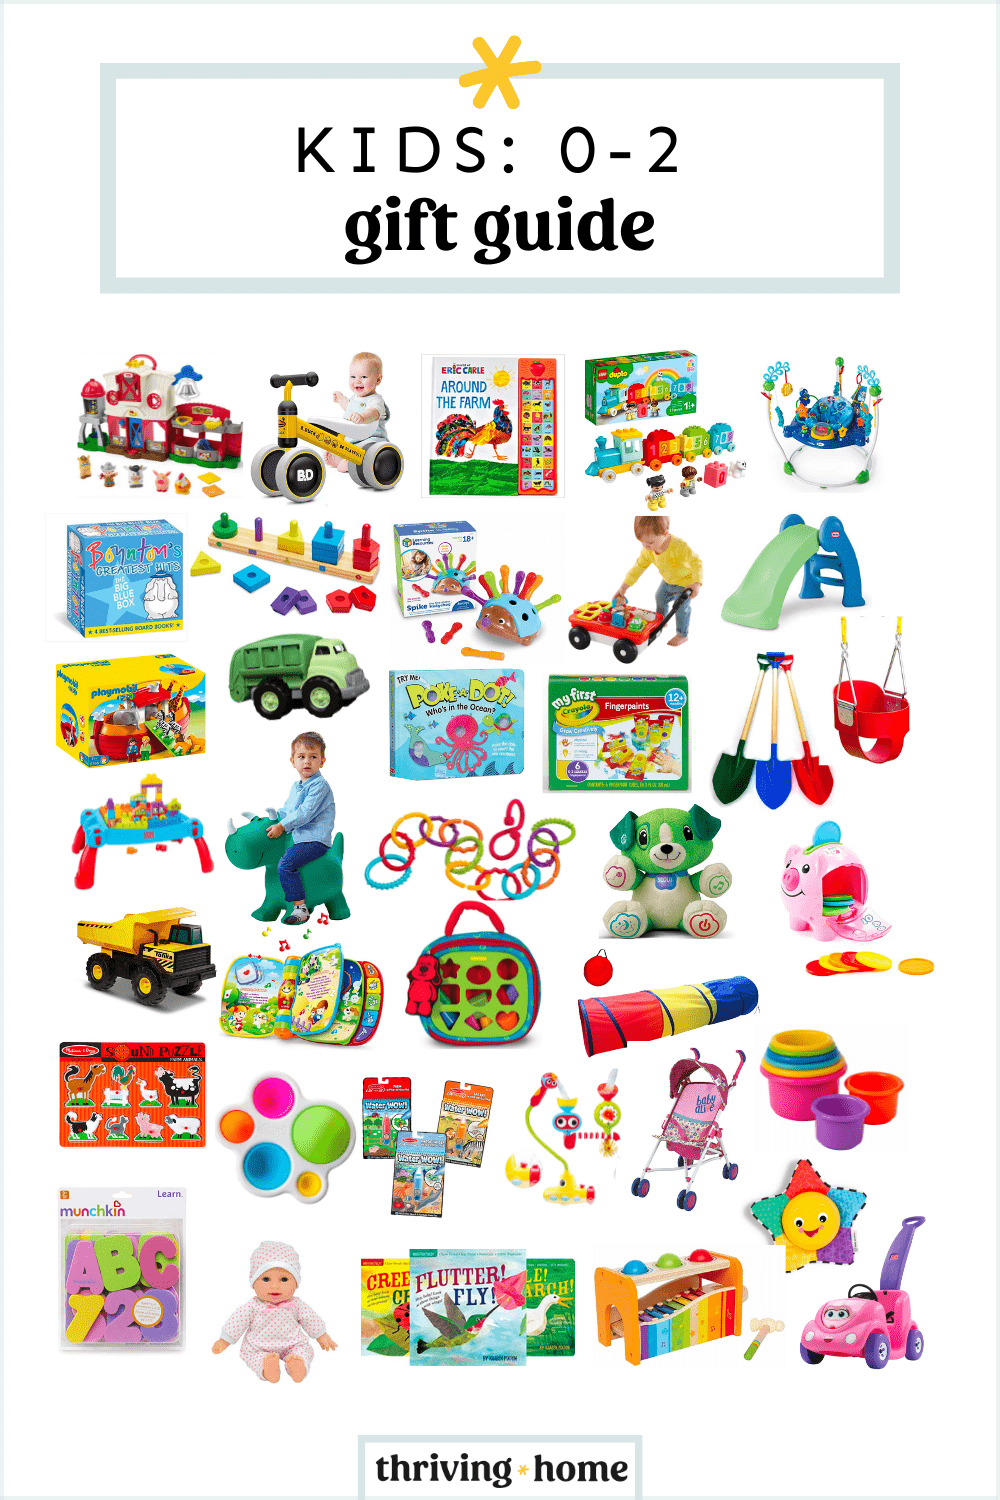 Most Cool Toys and Gifts For 2 Year Old Girls 2022 - ToyBuzz